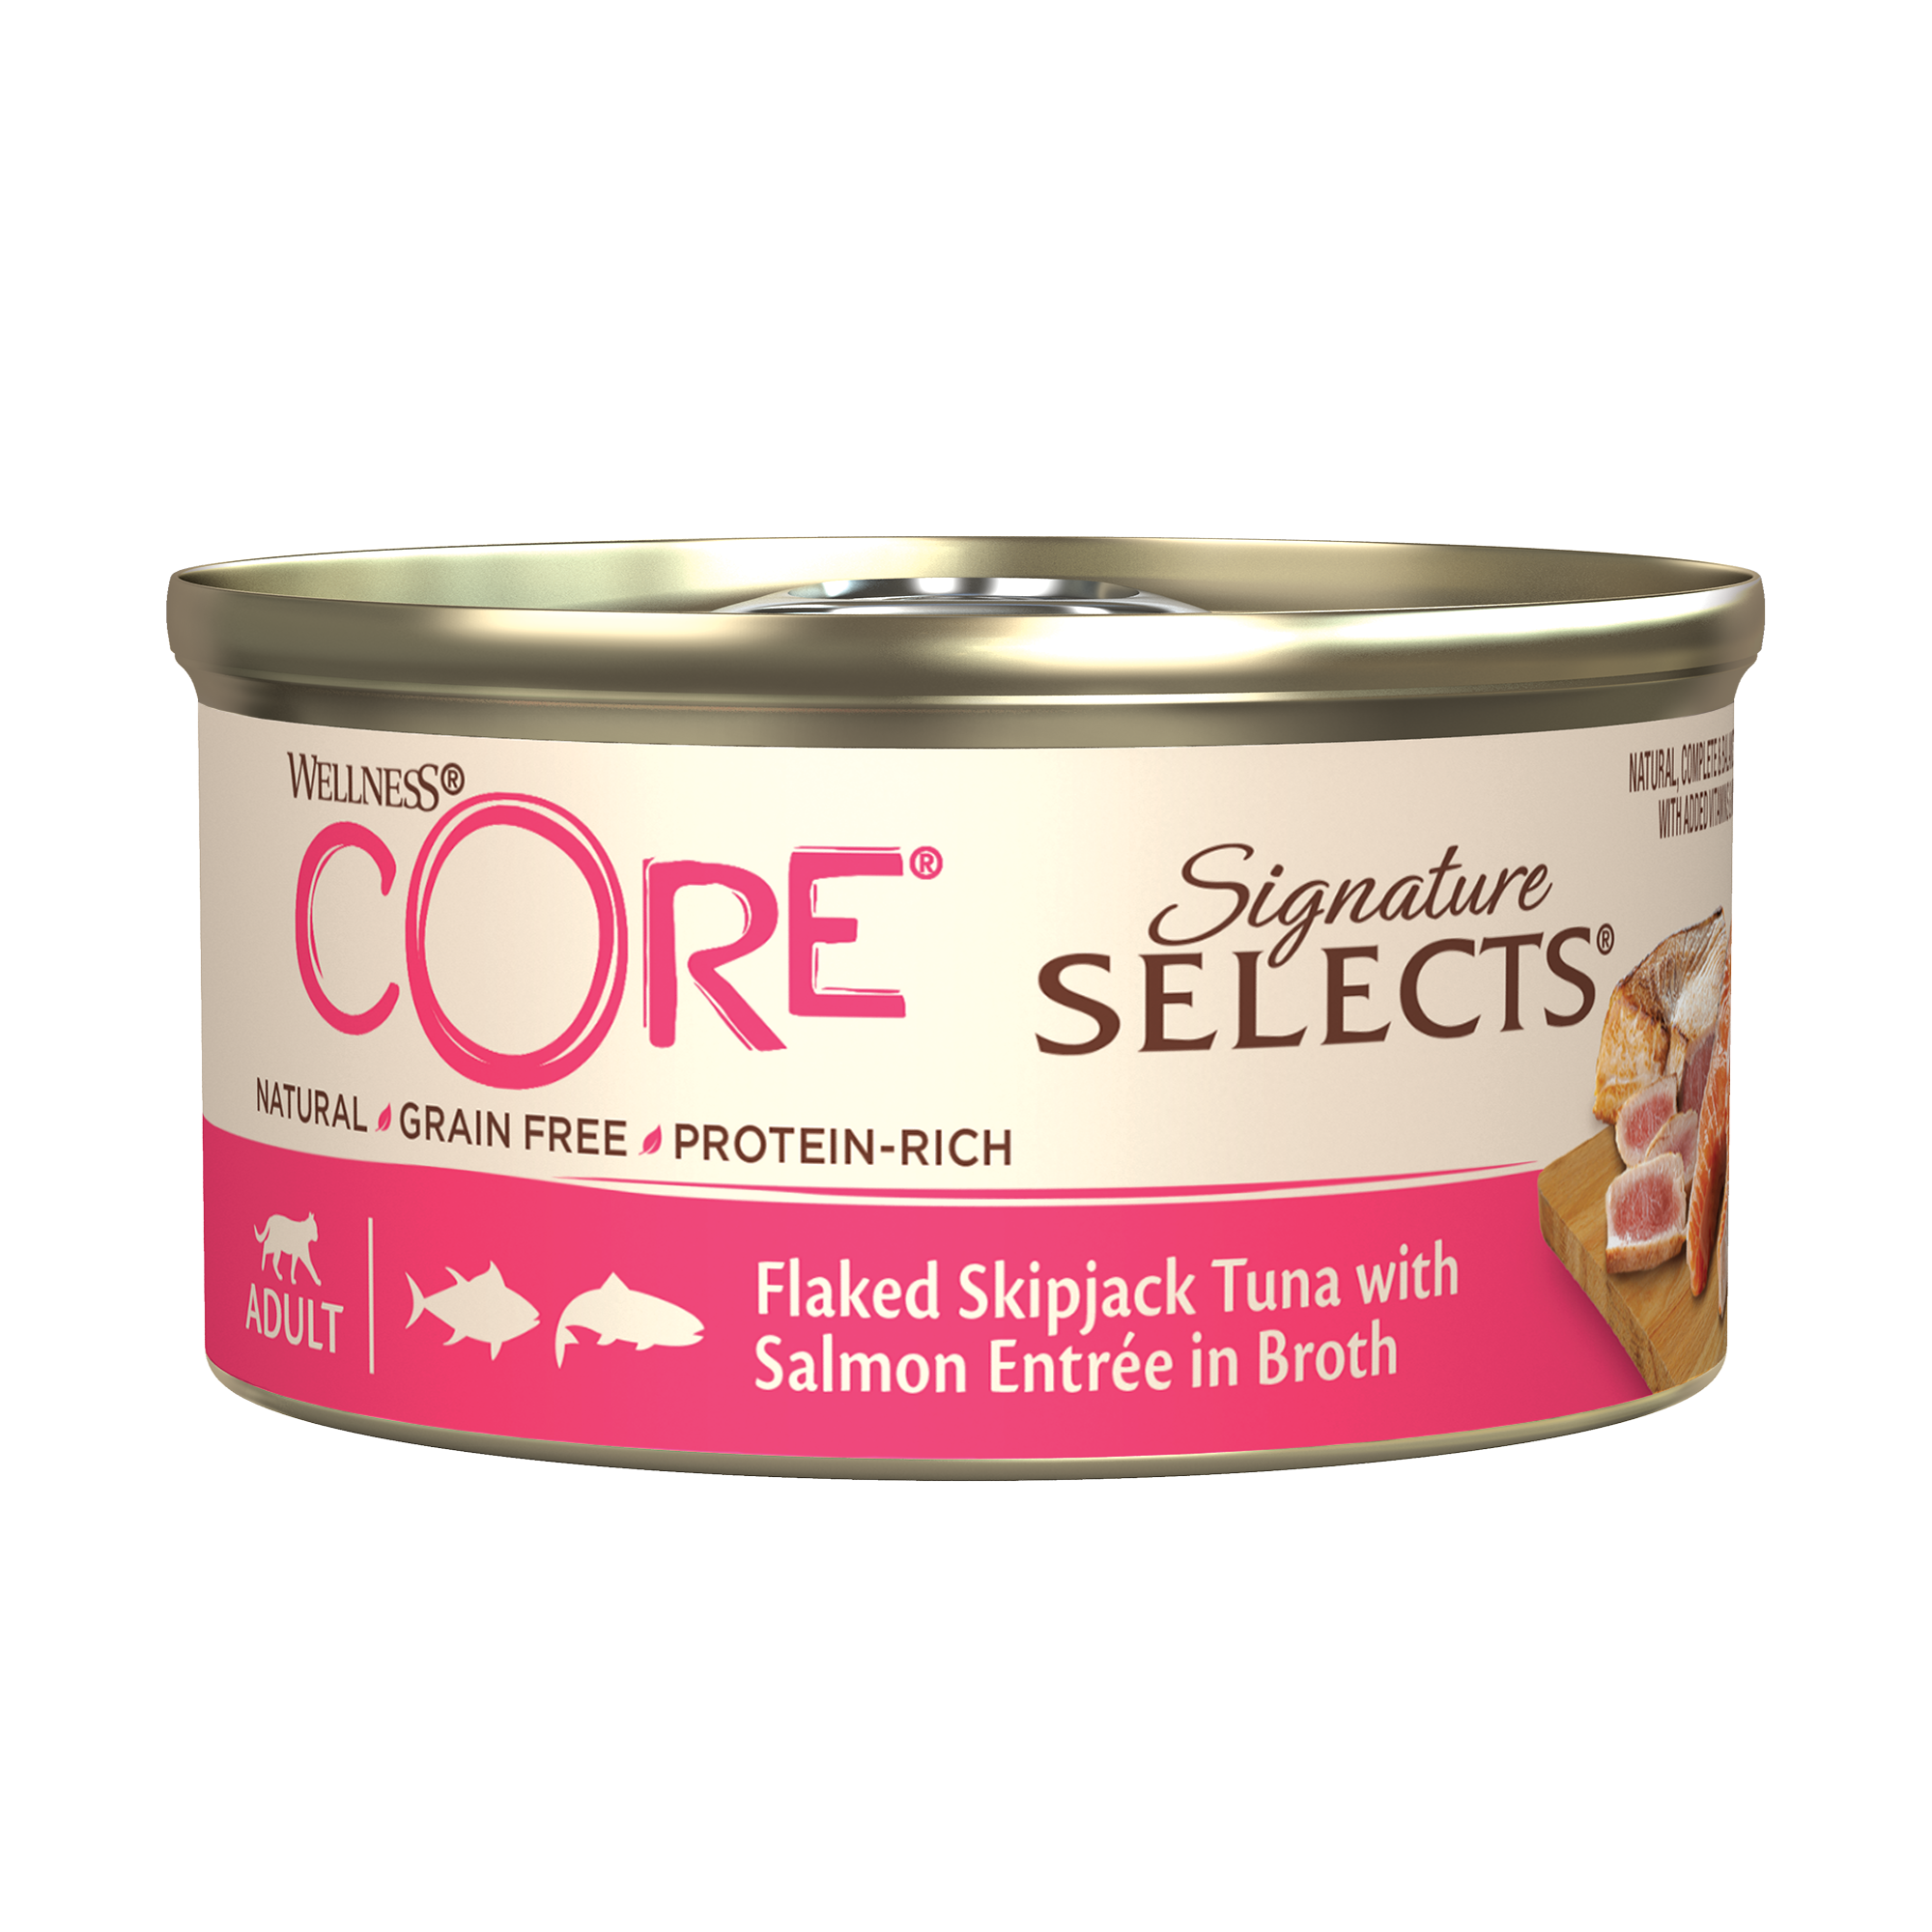 Wellness CORE Signature Selects Flaked Skipjack Tuna with Salmon Entree in Broth - 79g